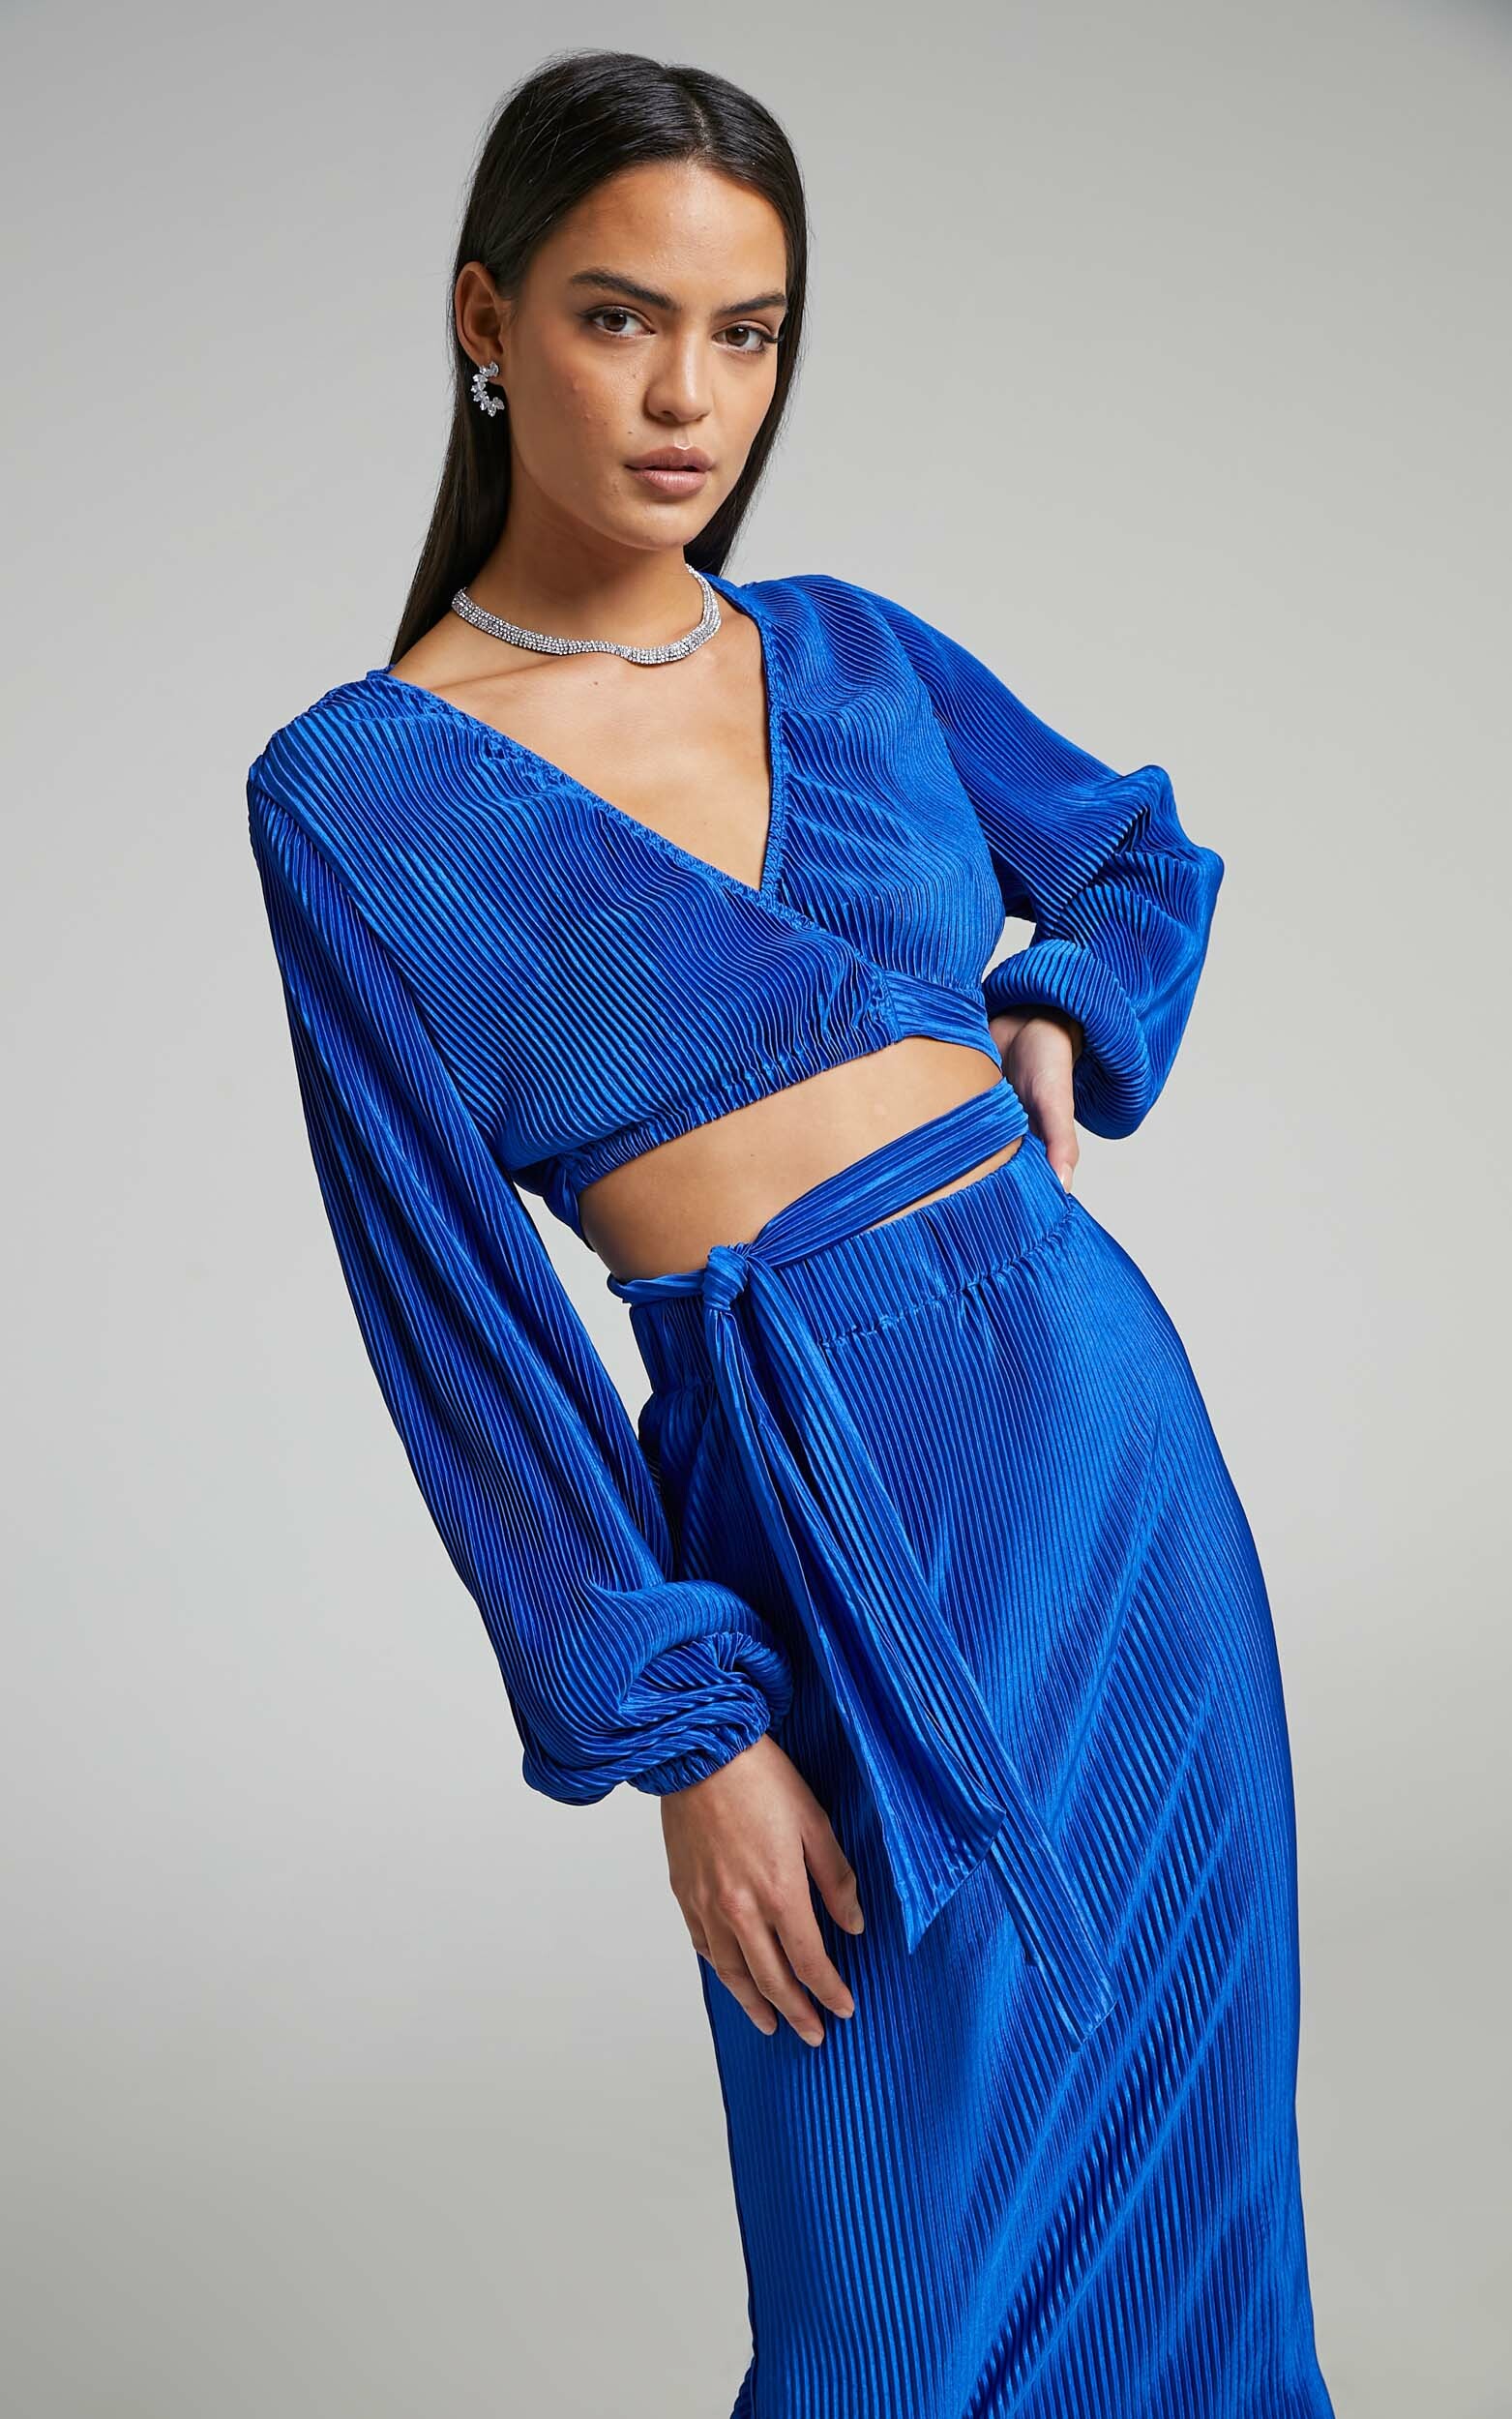 Allina Plisse Long Sleeve Wrap Top and Midi Skirt Two Piece Set in Cobalt - 04, BLU1, hi-res image number null